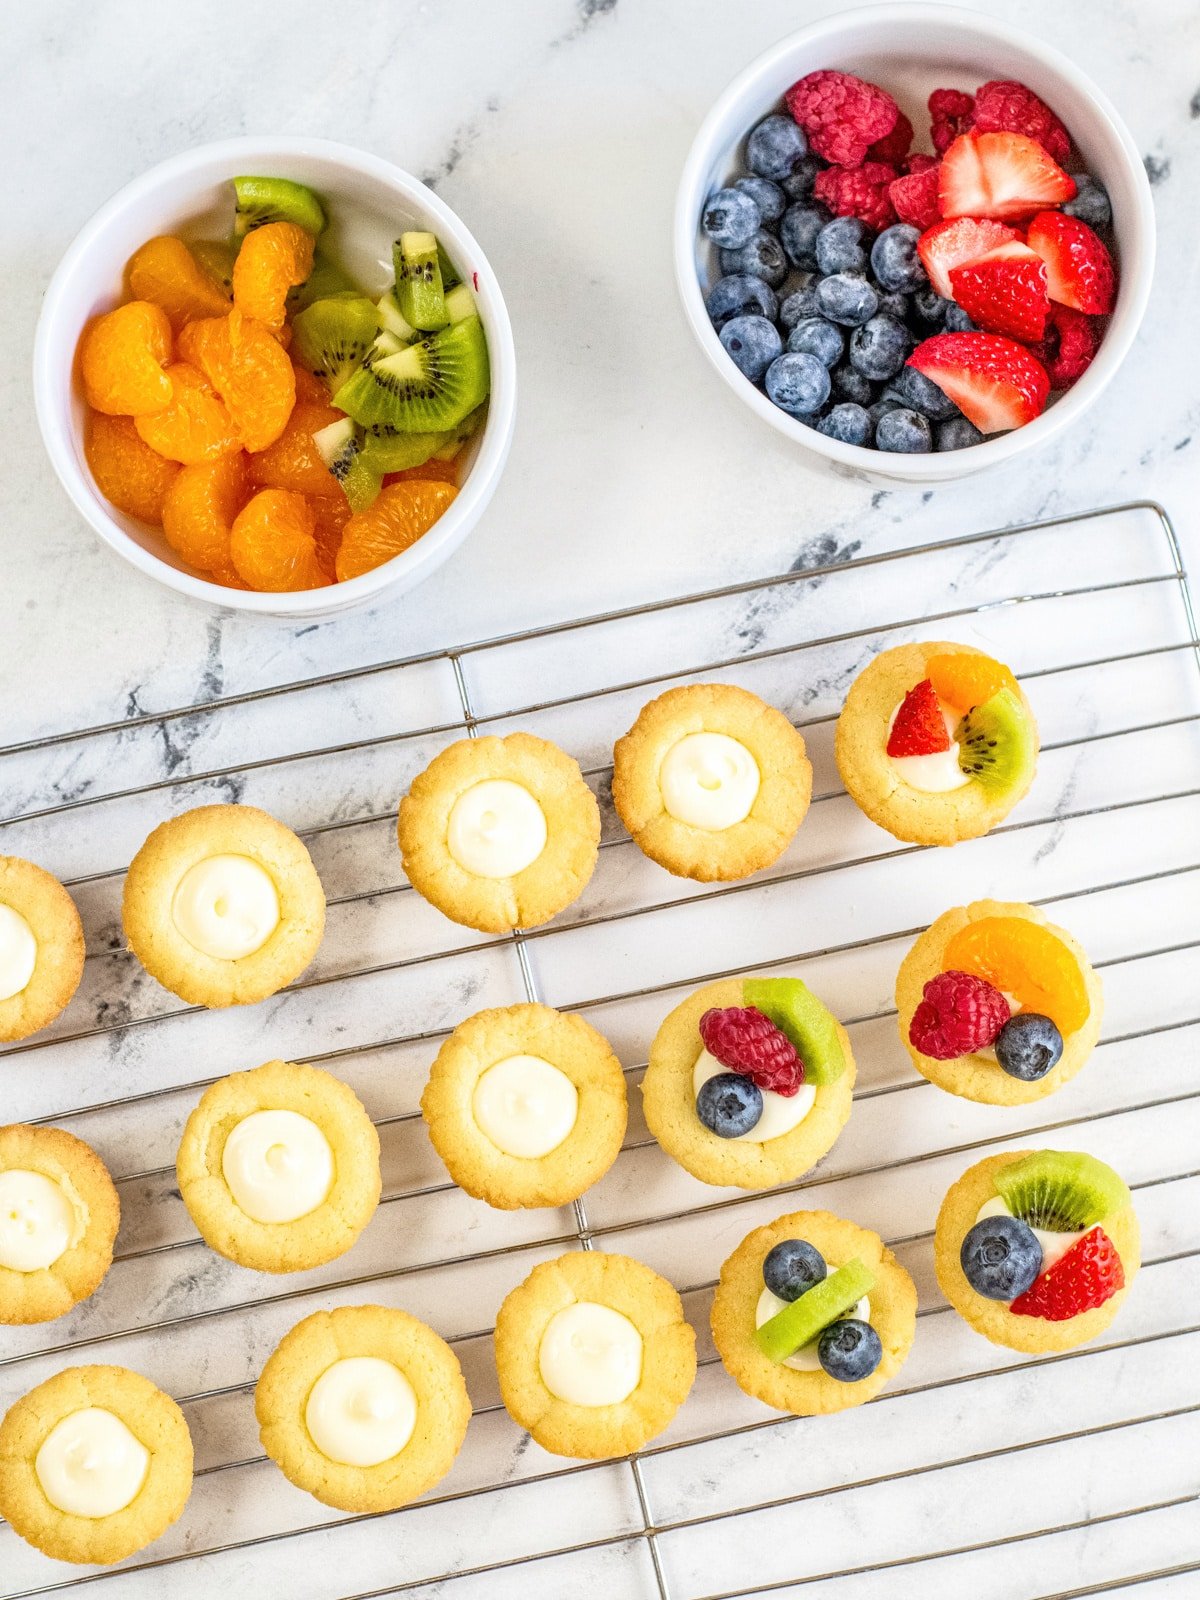 dice fruit into small pieces and add to mini tarts